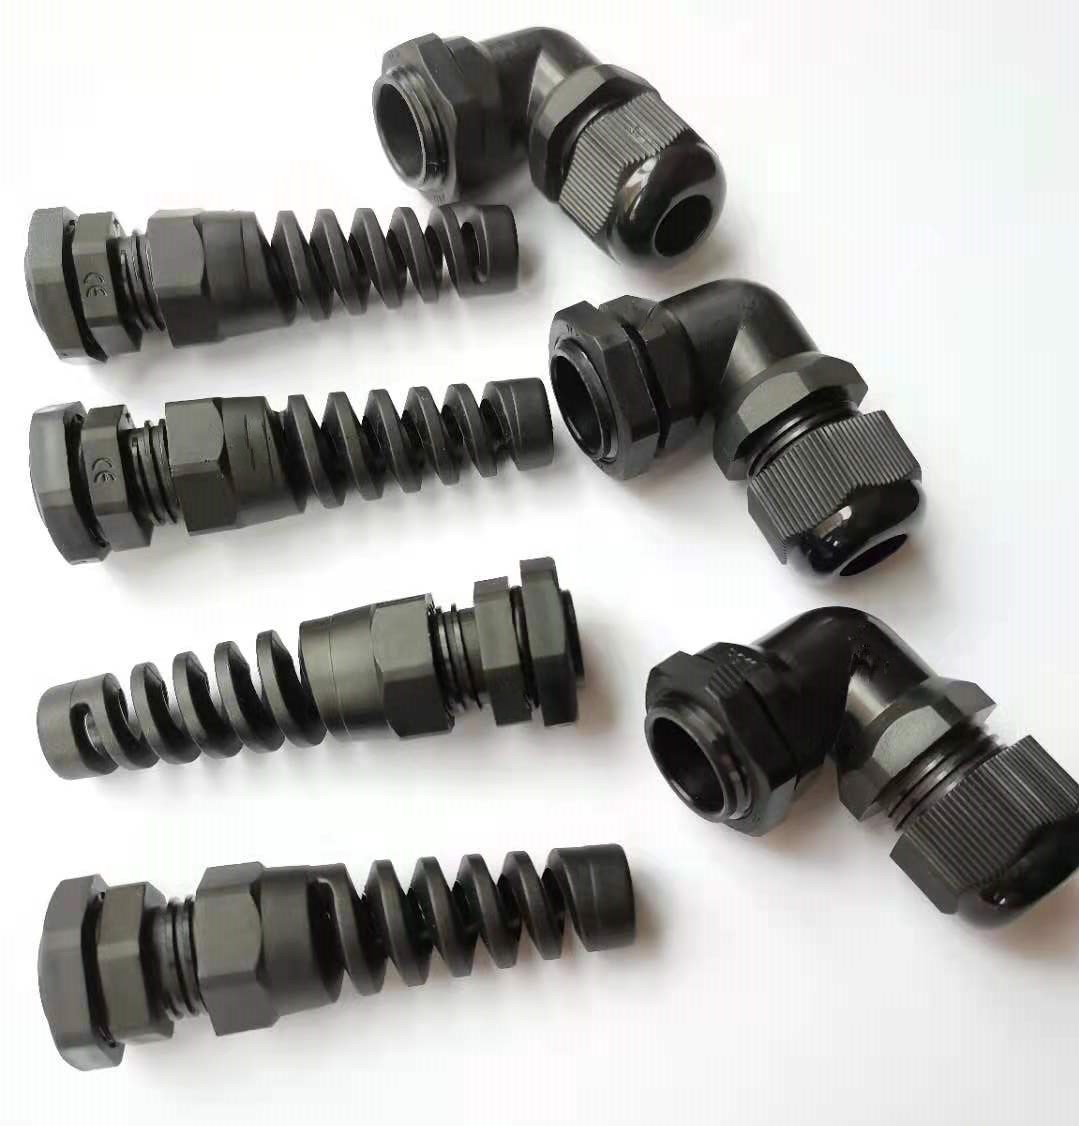 explosion proof cable gland PG7 PG9 PG11 PG13.5 PG16 PG19 PG21 Long Thread Spiral Nylon Pg Length Industrial Cable Glands